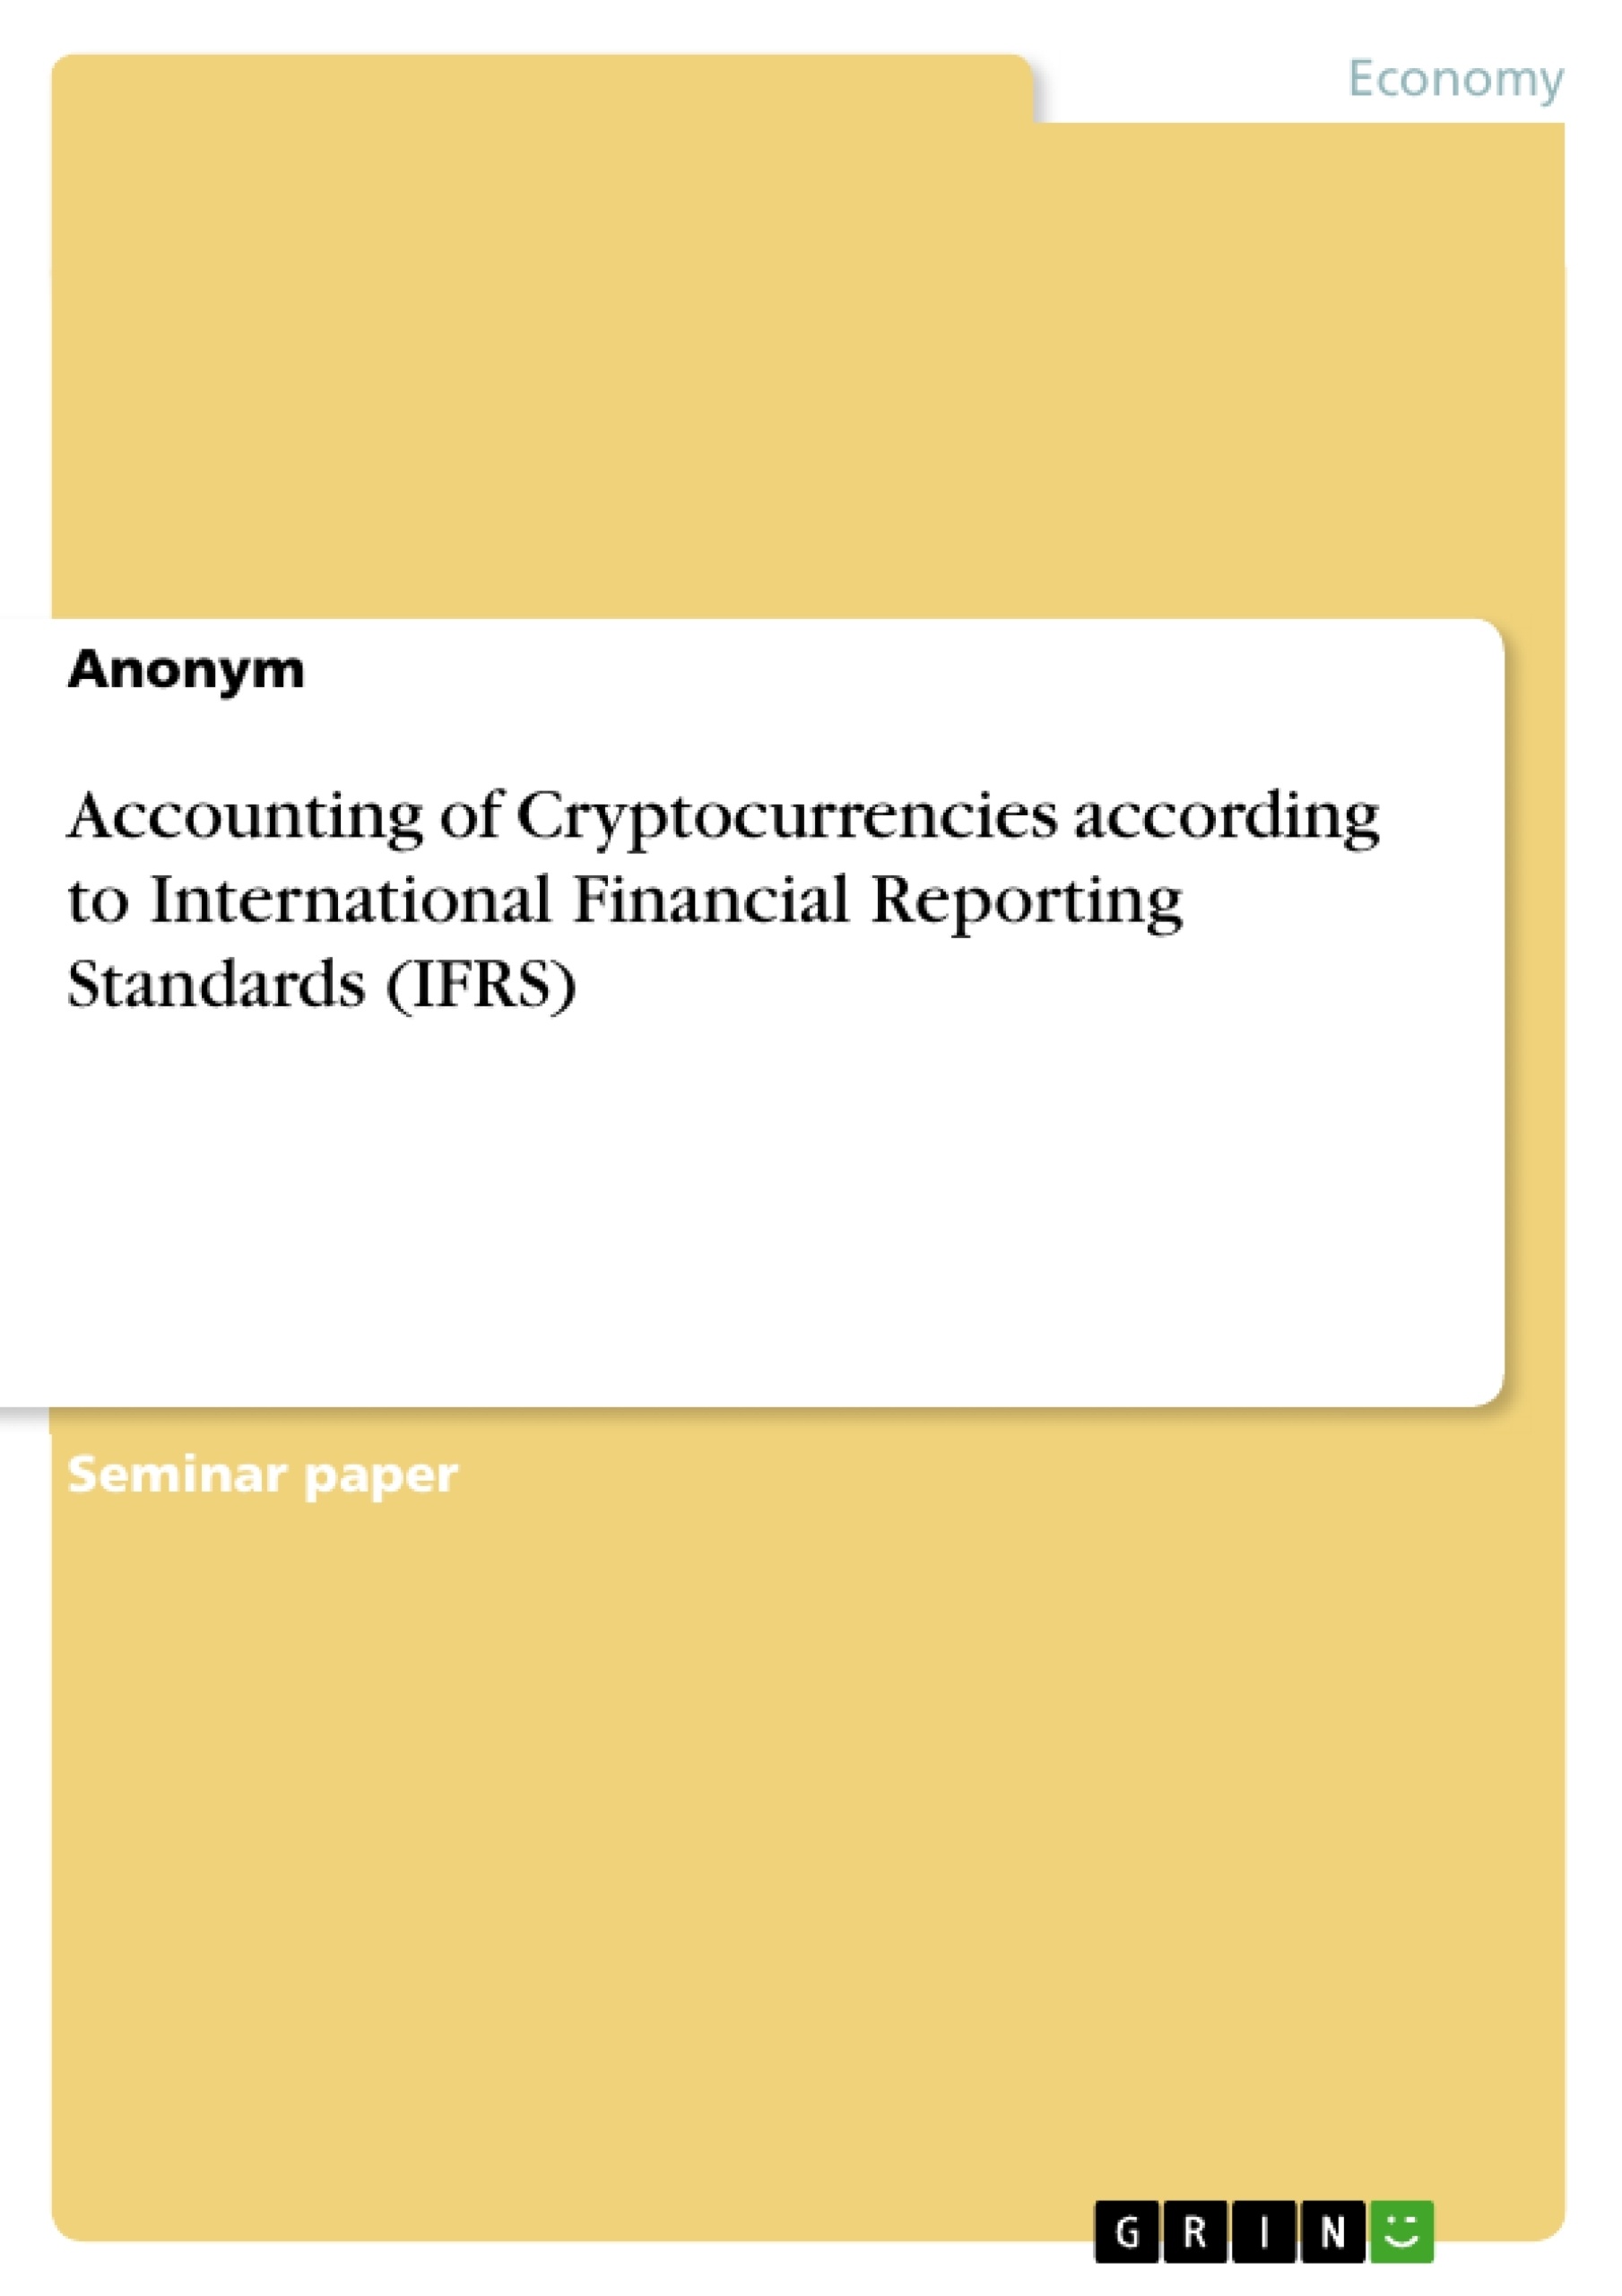 Título: Accounting of Cryptocurrencies according to International Financial Reporting Standards (IFRS)